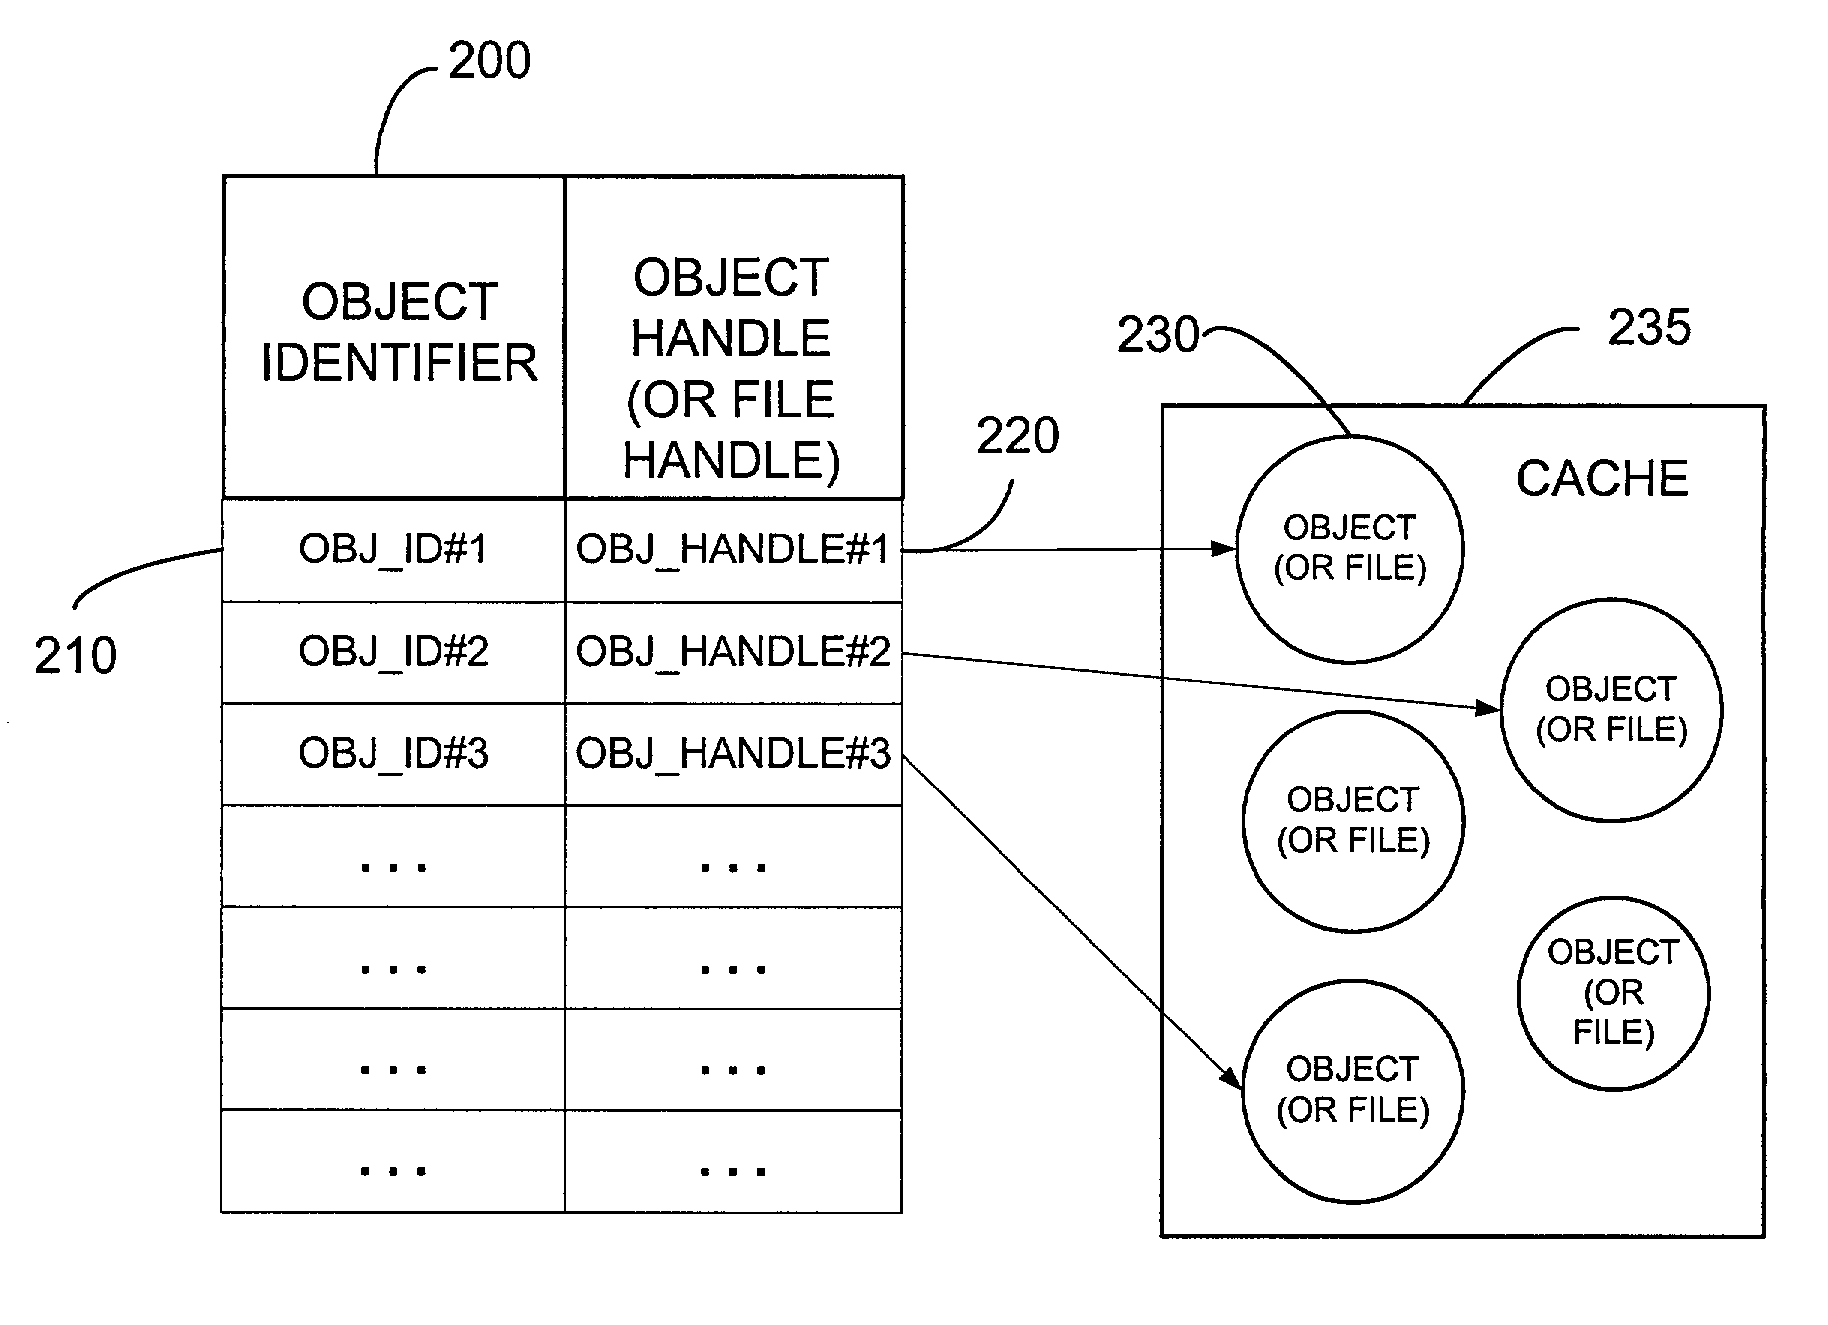 Methods and apparatus for storing and serving streaming media data